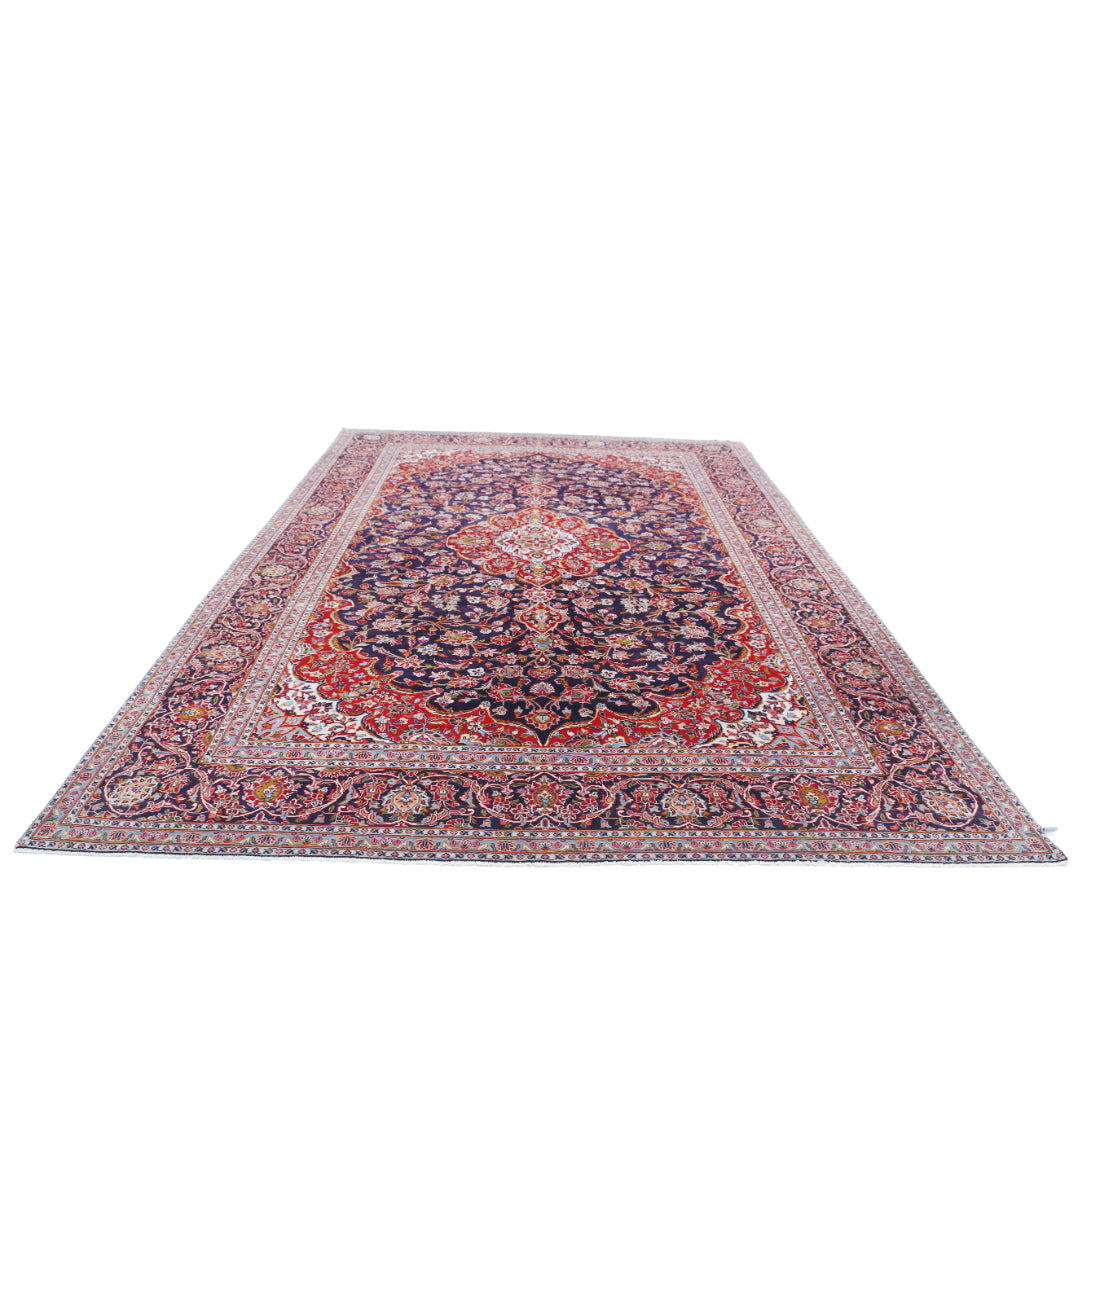 Hand Knotted Persian Kashan Wool Rug - 9'0'' x 13'2'' 9'0'' x 13'2'' (270 X 395) / Blue / Red